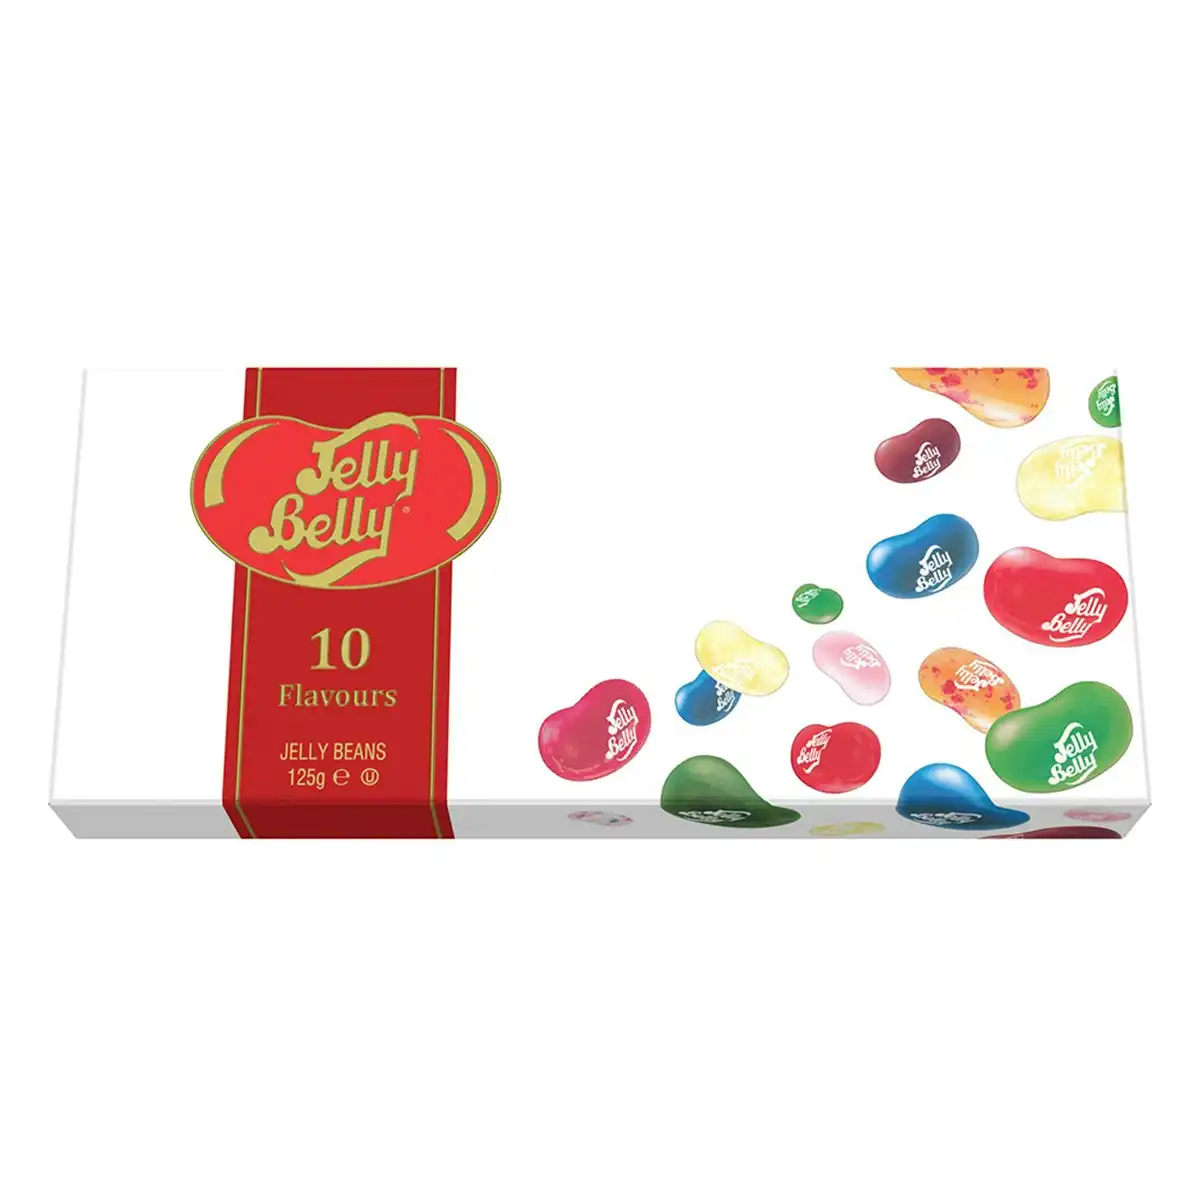 Jelly Belly 10 Assorted Flavour 125g Jelly Bean Gift Box Chewy Confectionery